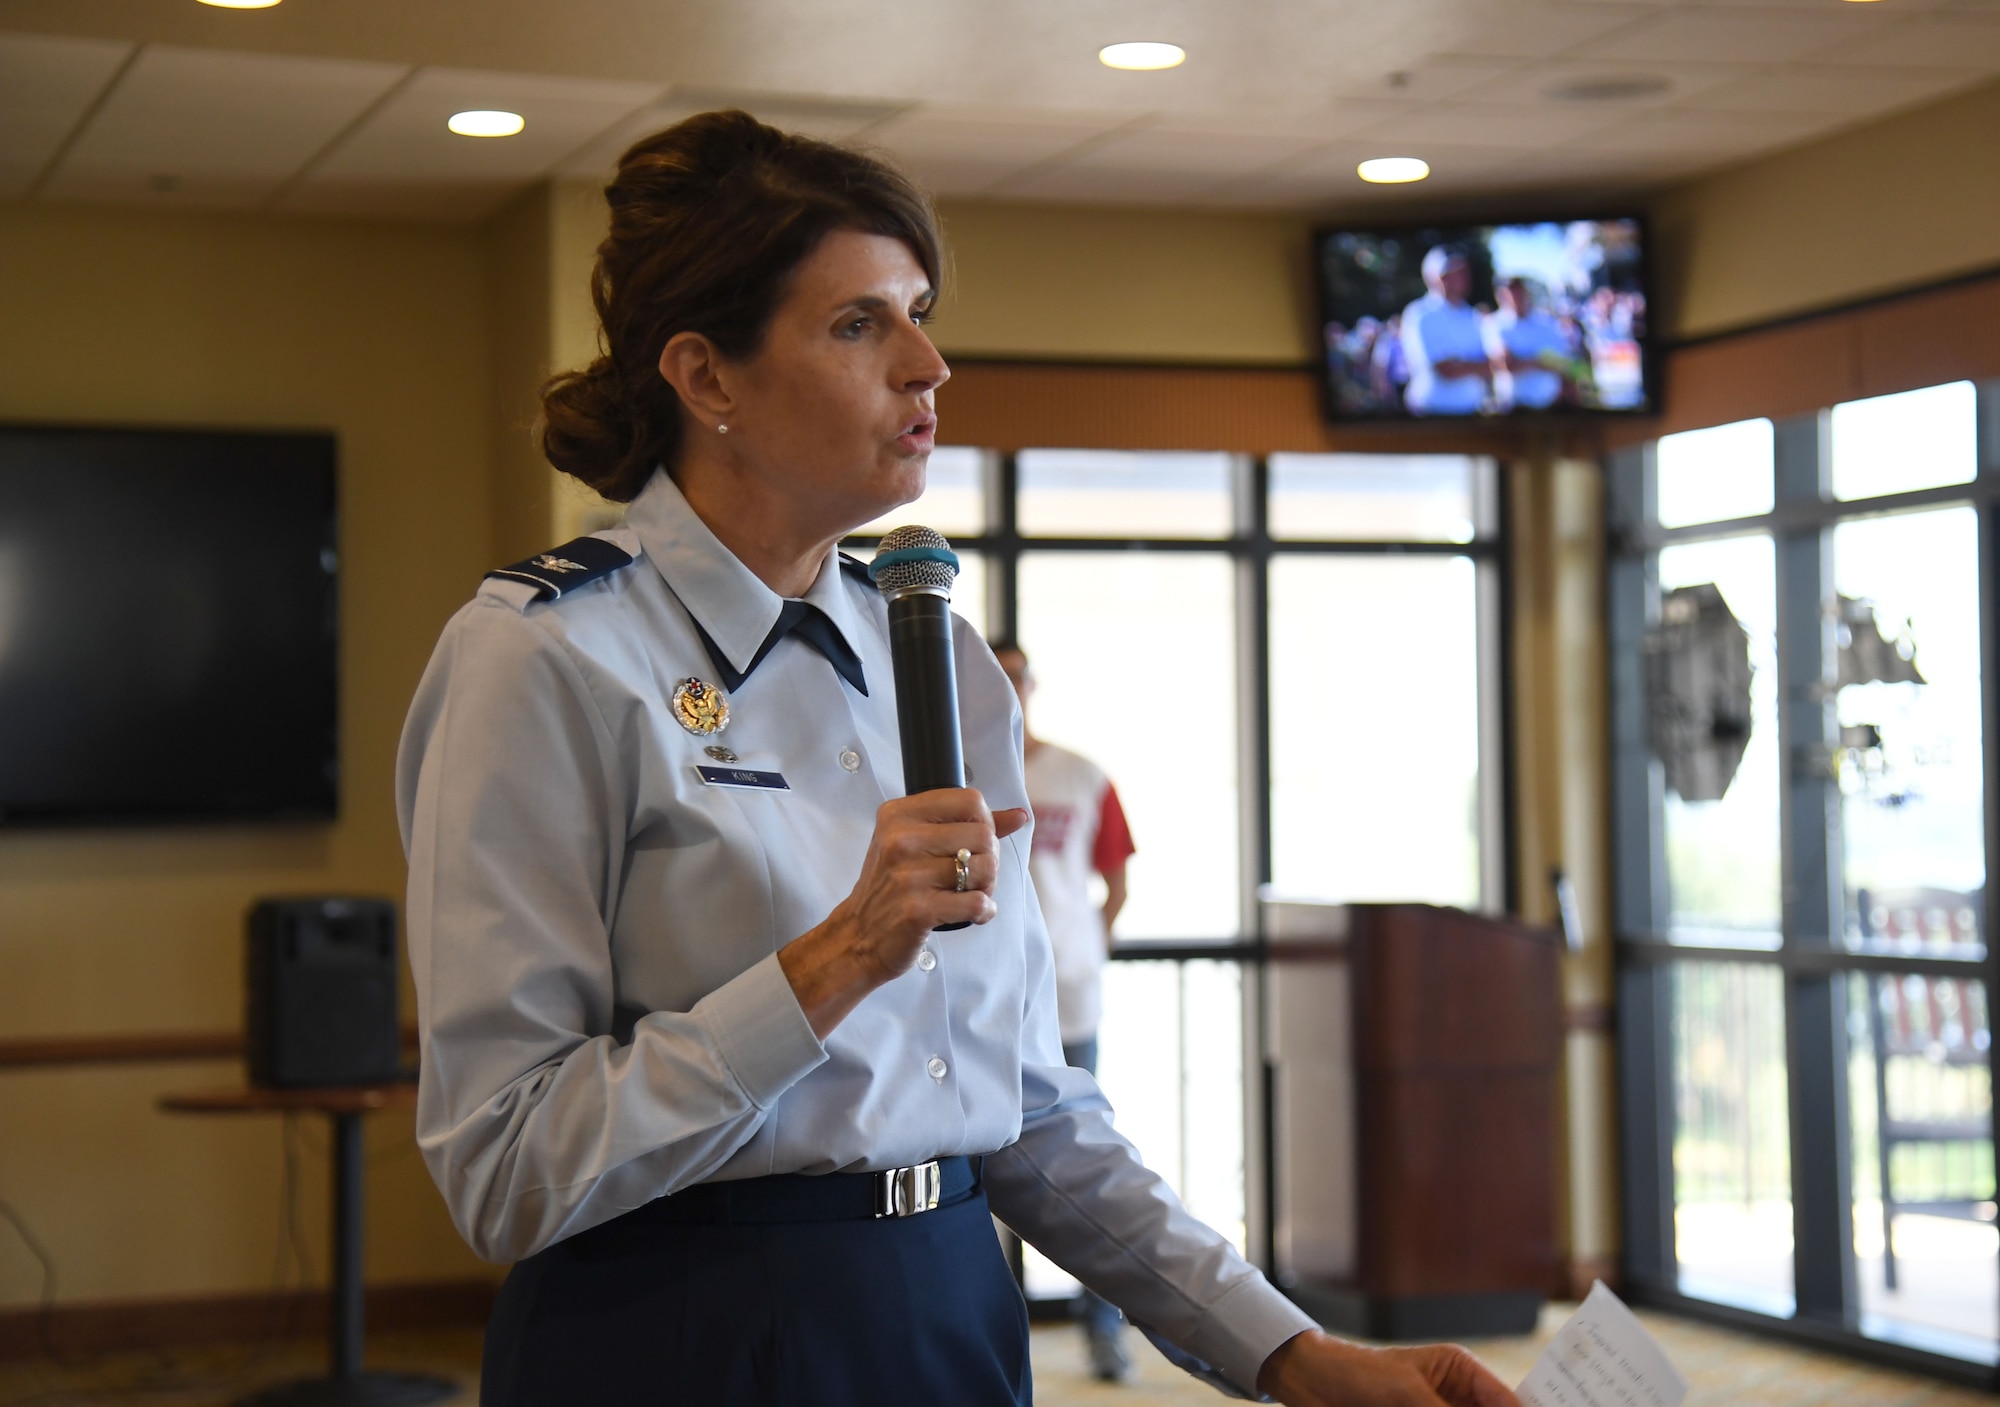 U.S. Air Force Col. Laura King, 81st Training Group commander, delivers remarks during the Hispanic Heritage Month event inside the Bay Breeze Event Center at Keesler Air Force Base, Mississippi, Sept. 23, 2022. Dominos and dance lessons were offered during the event. Hispanic Heritage Month is celebrated September 15 through October 15. (U.S. Air Force photo by Kemberly Groue)